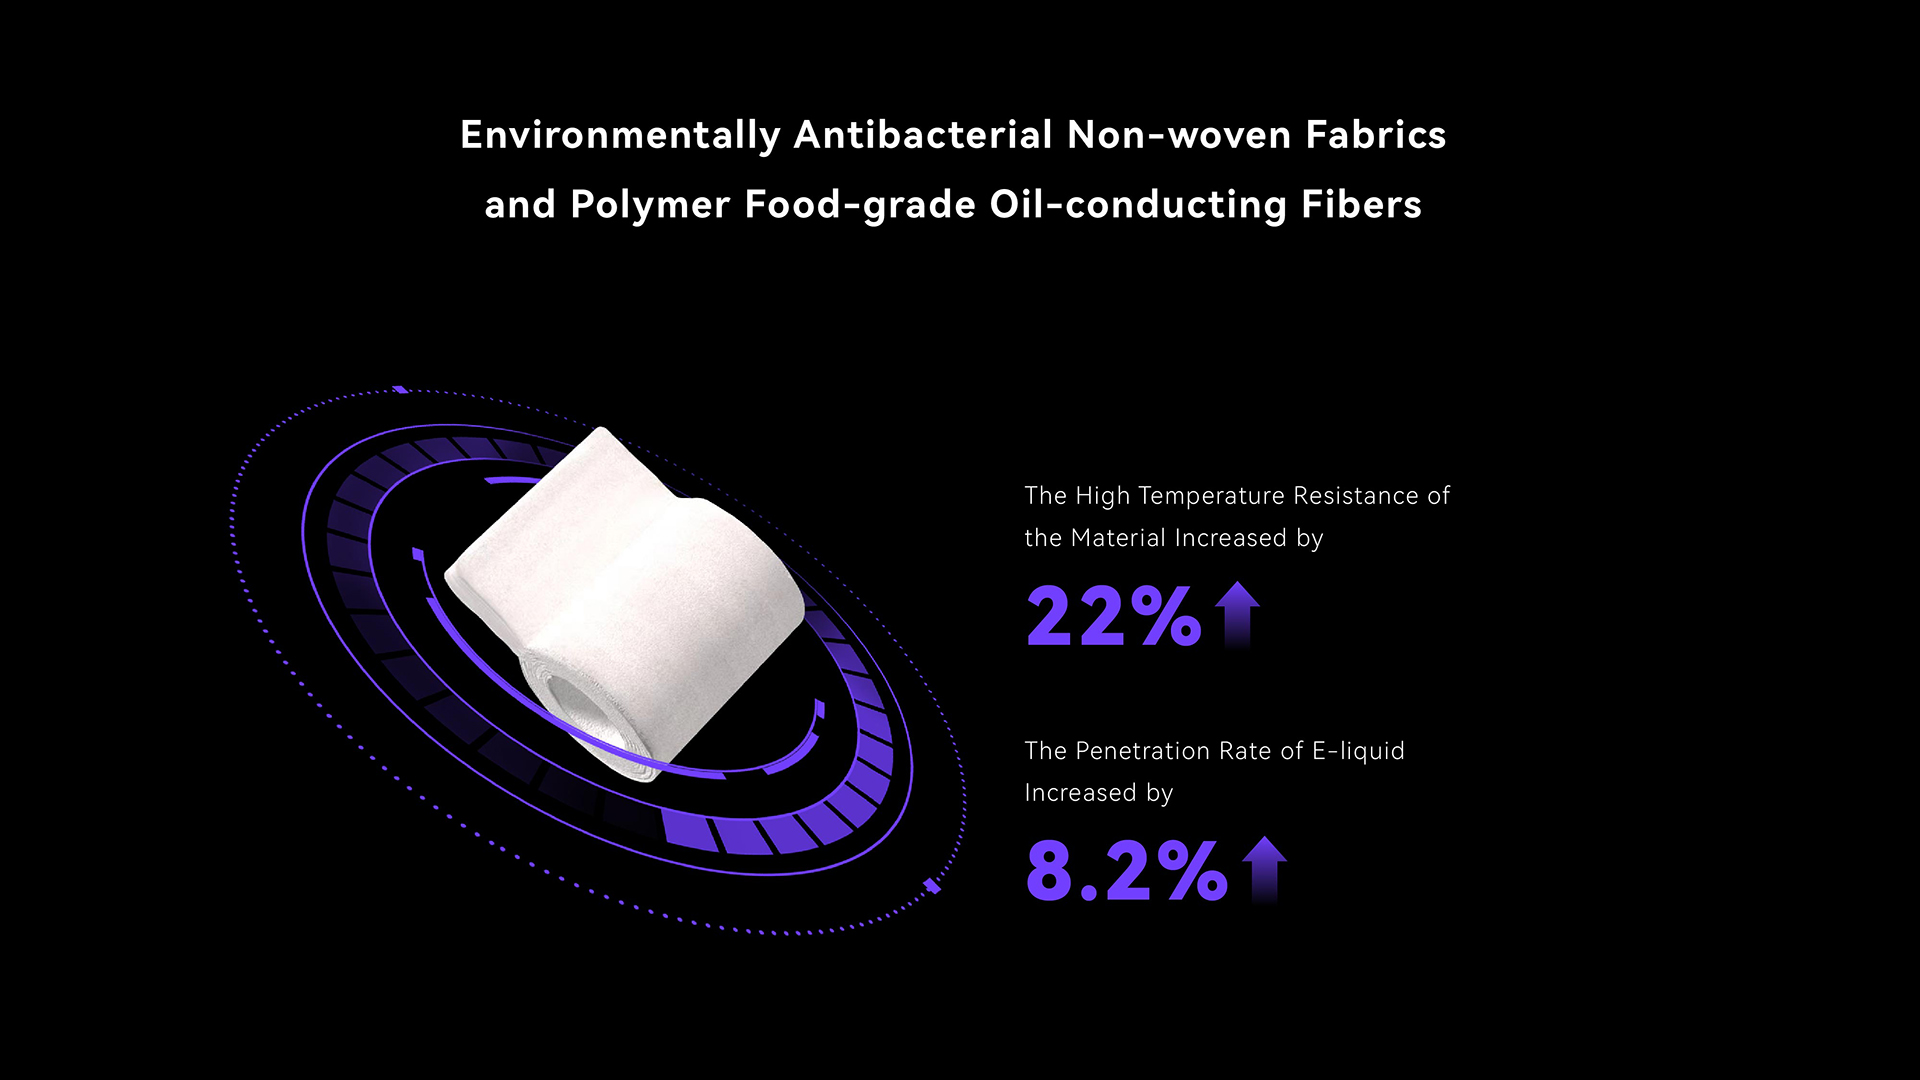 Use of Environmentally antibacterial non-woven fabrics and polymer food-grade oil-wicking fibres. E-liquid absorption increased by 8.2%